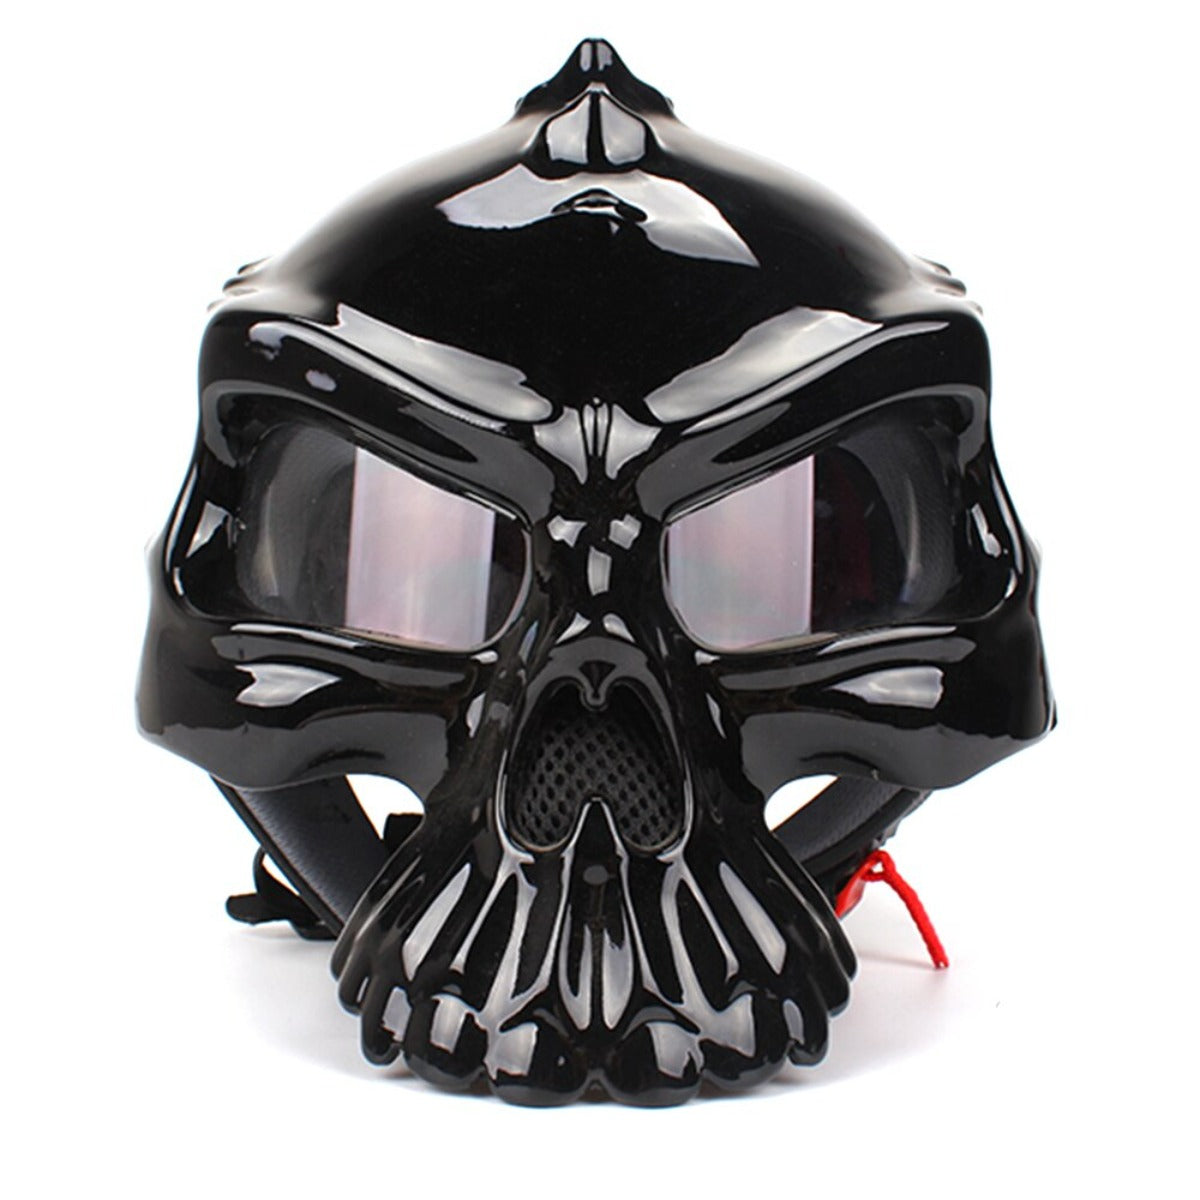 A stylish and durable black Motorcycle Half Face Skull Helmet suitable for various types of riders and vehicles.